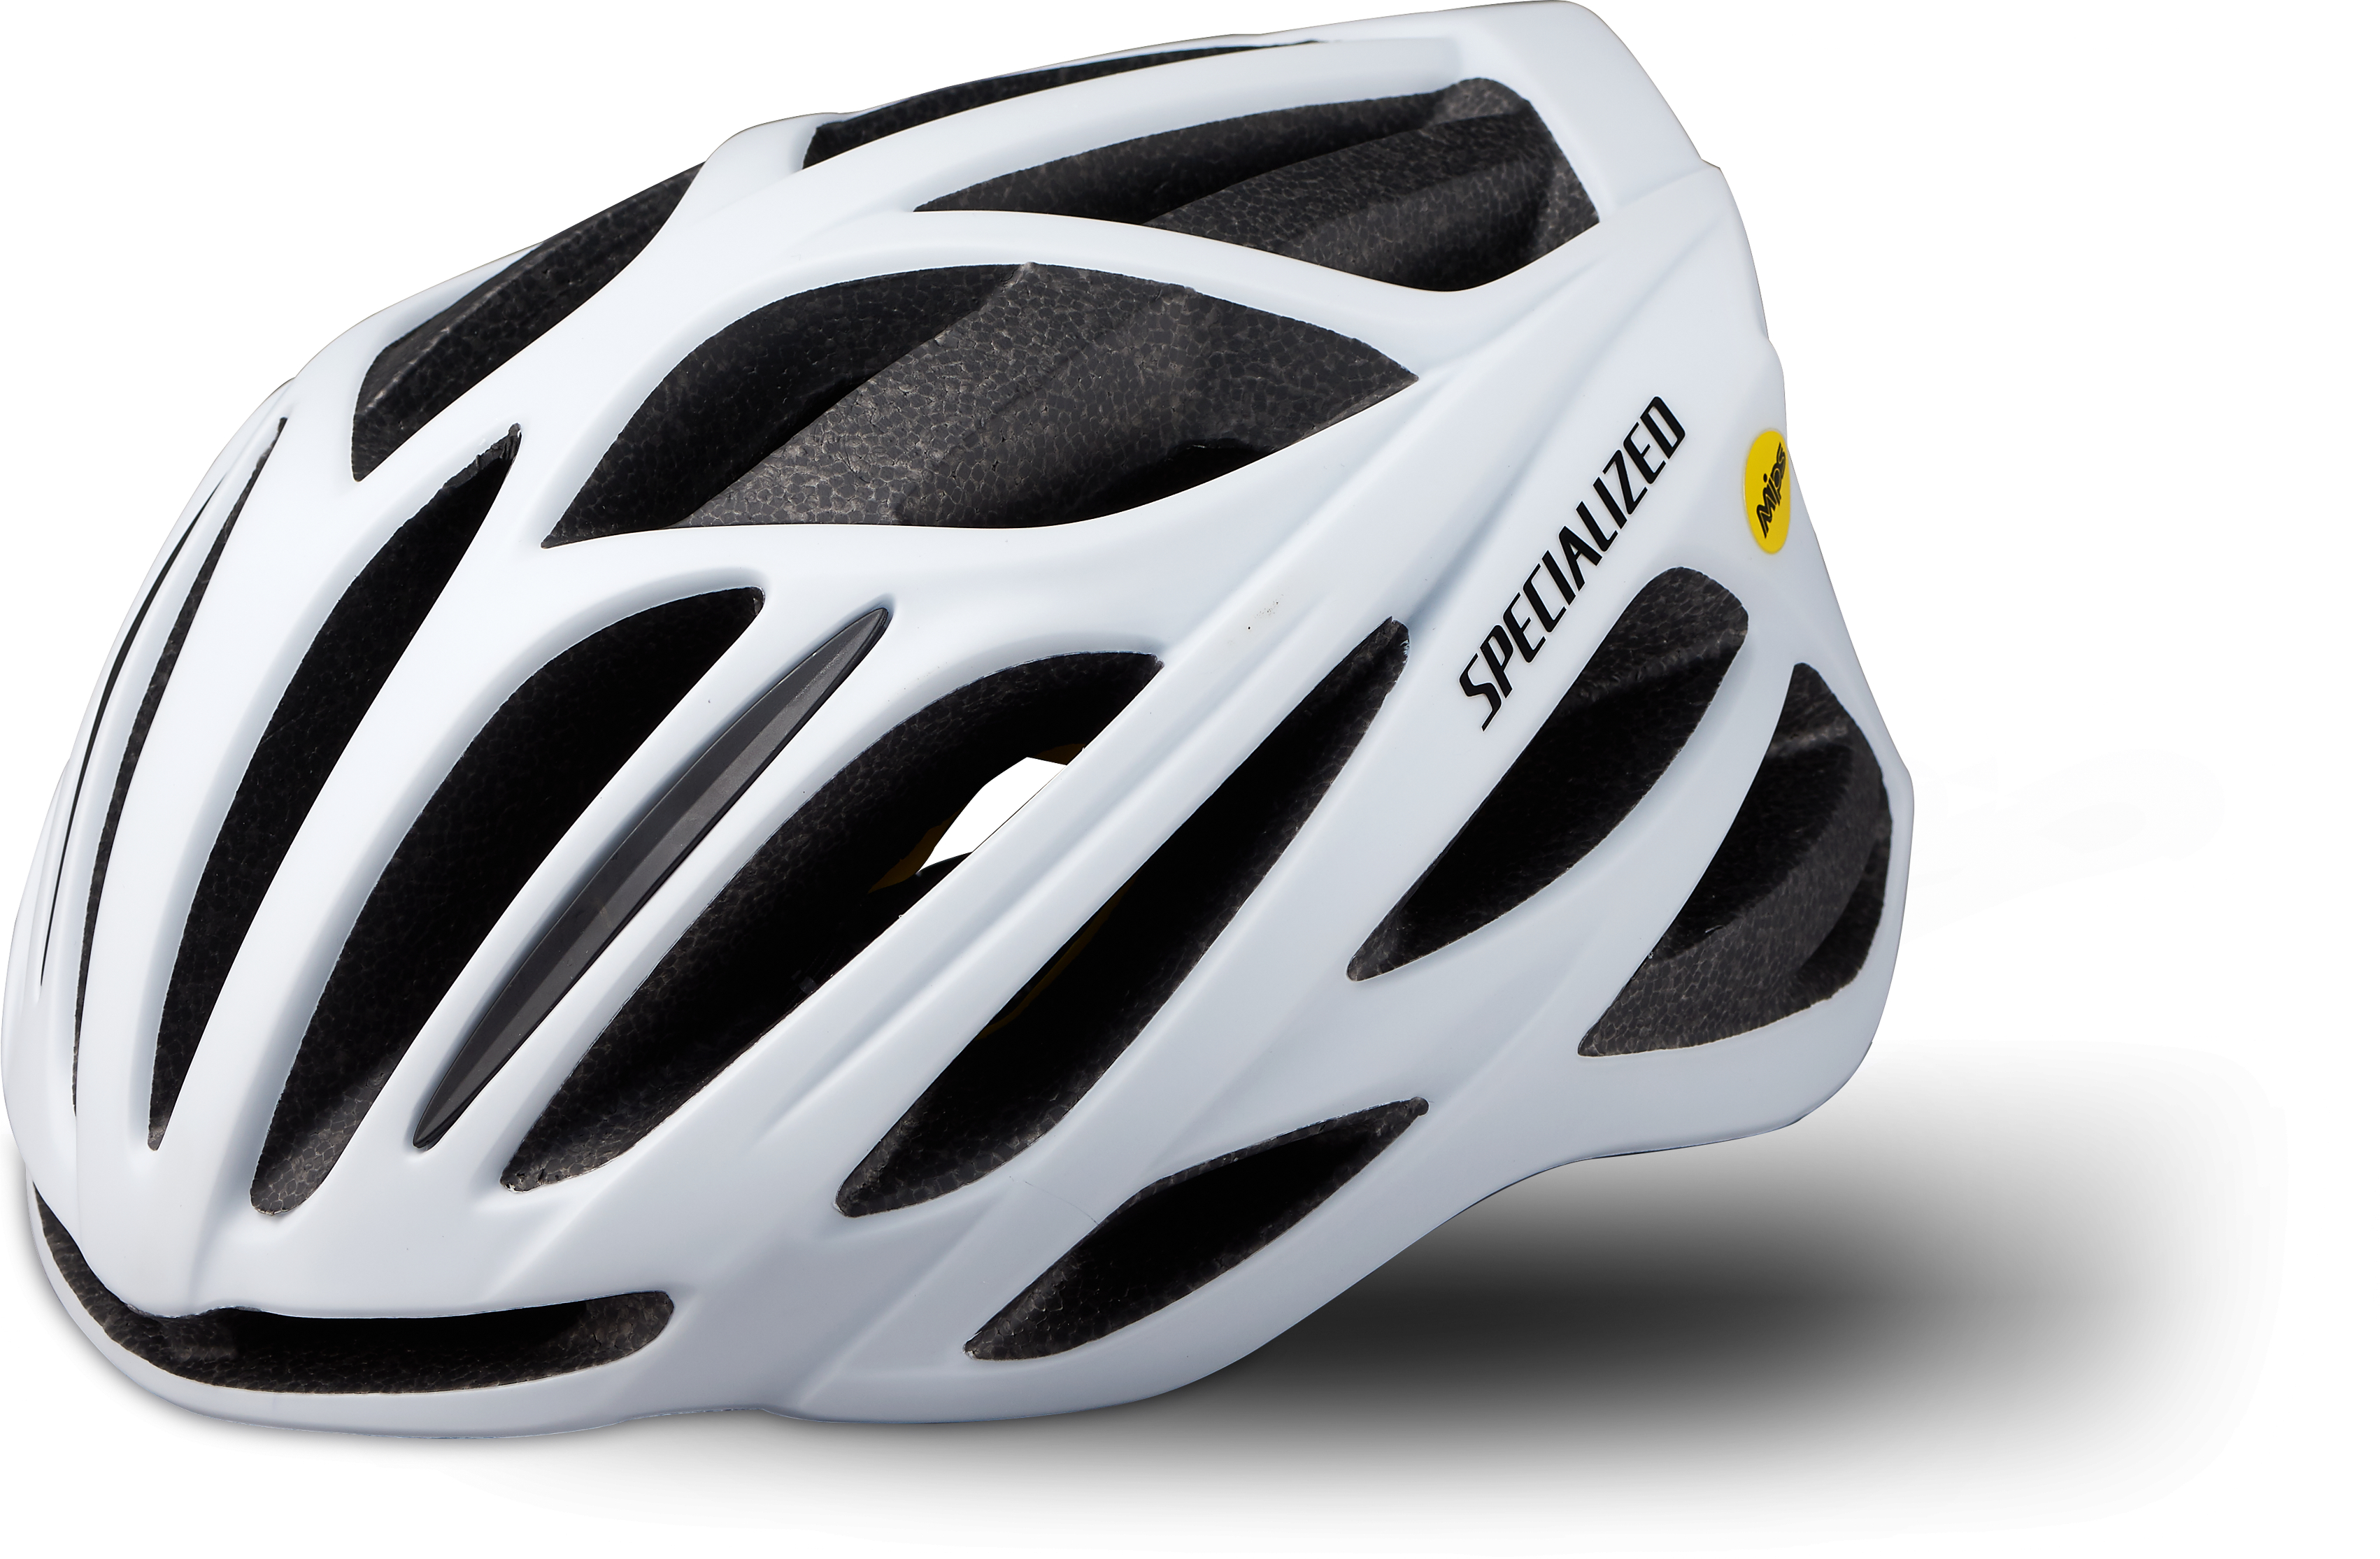 Cycles UK Specialized  Echelon II MIPS Road Cycling Helmet S Matte White